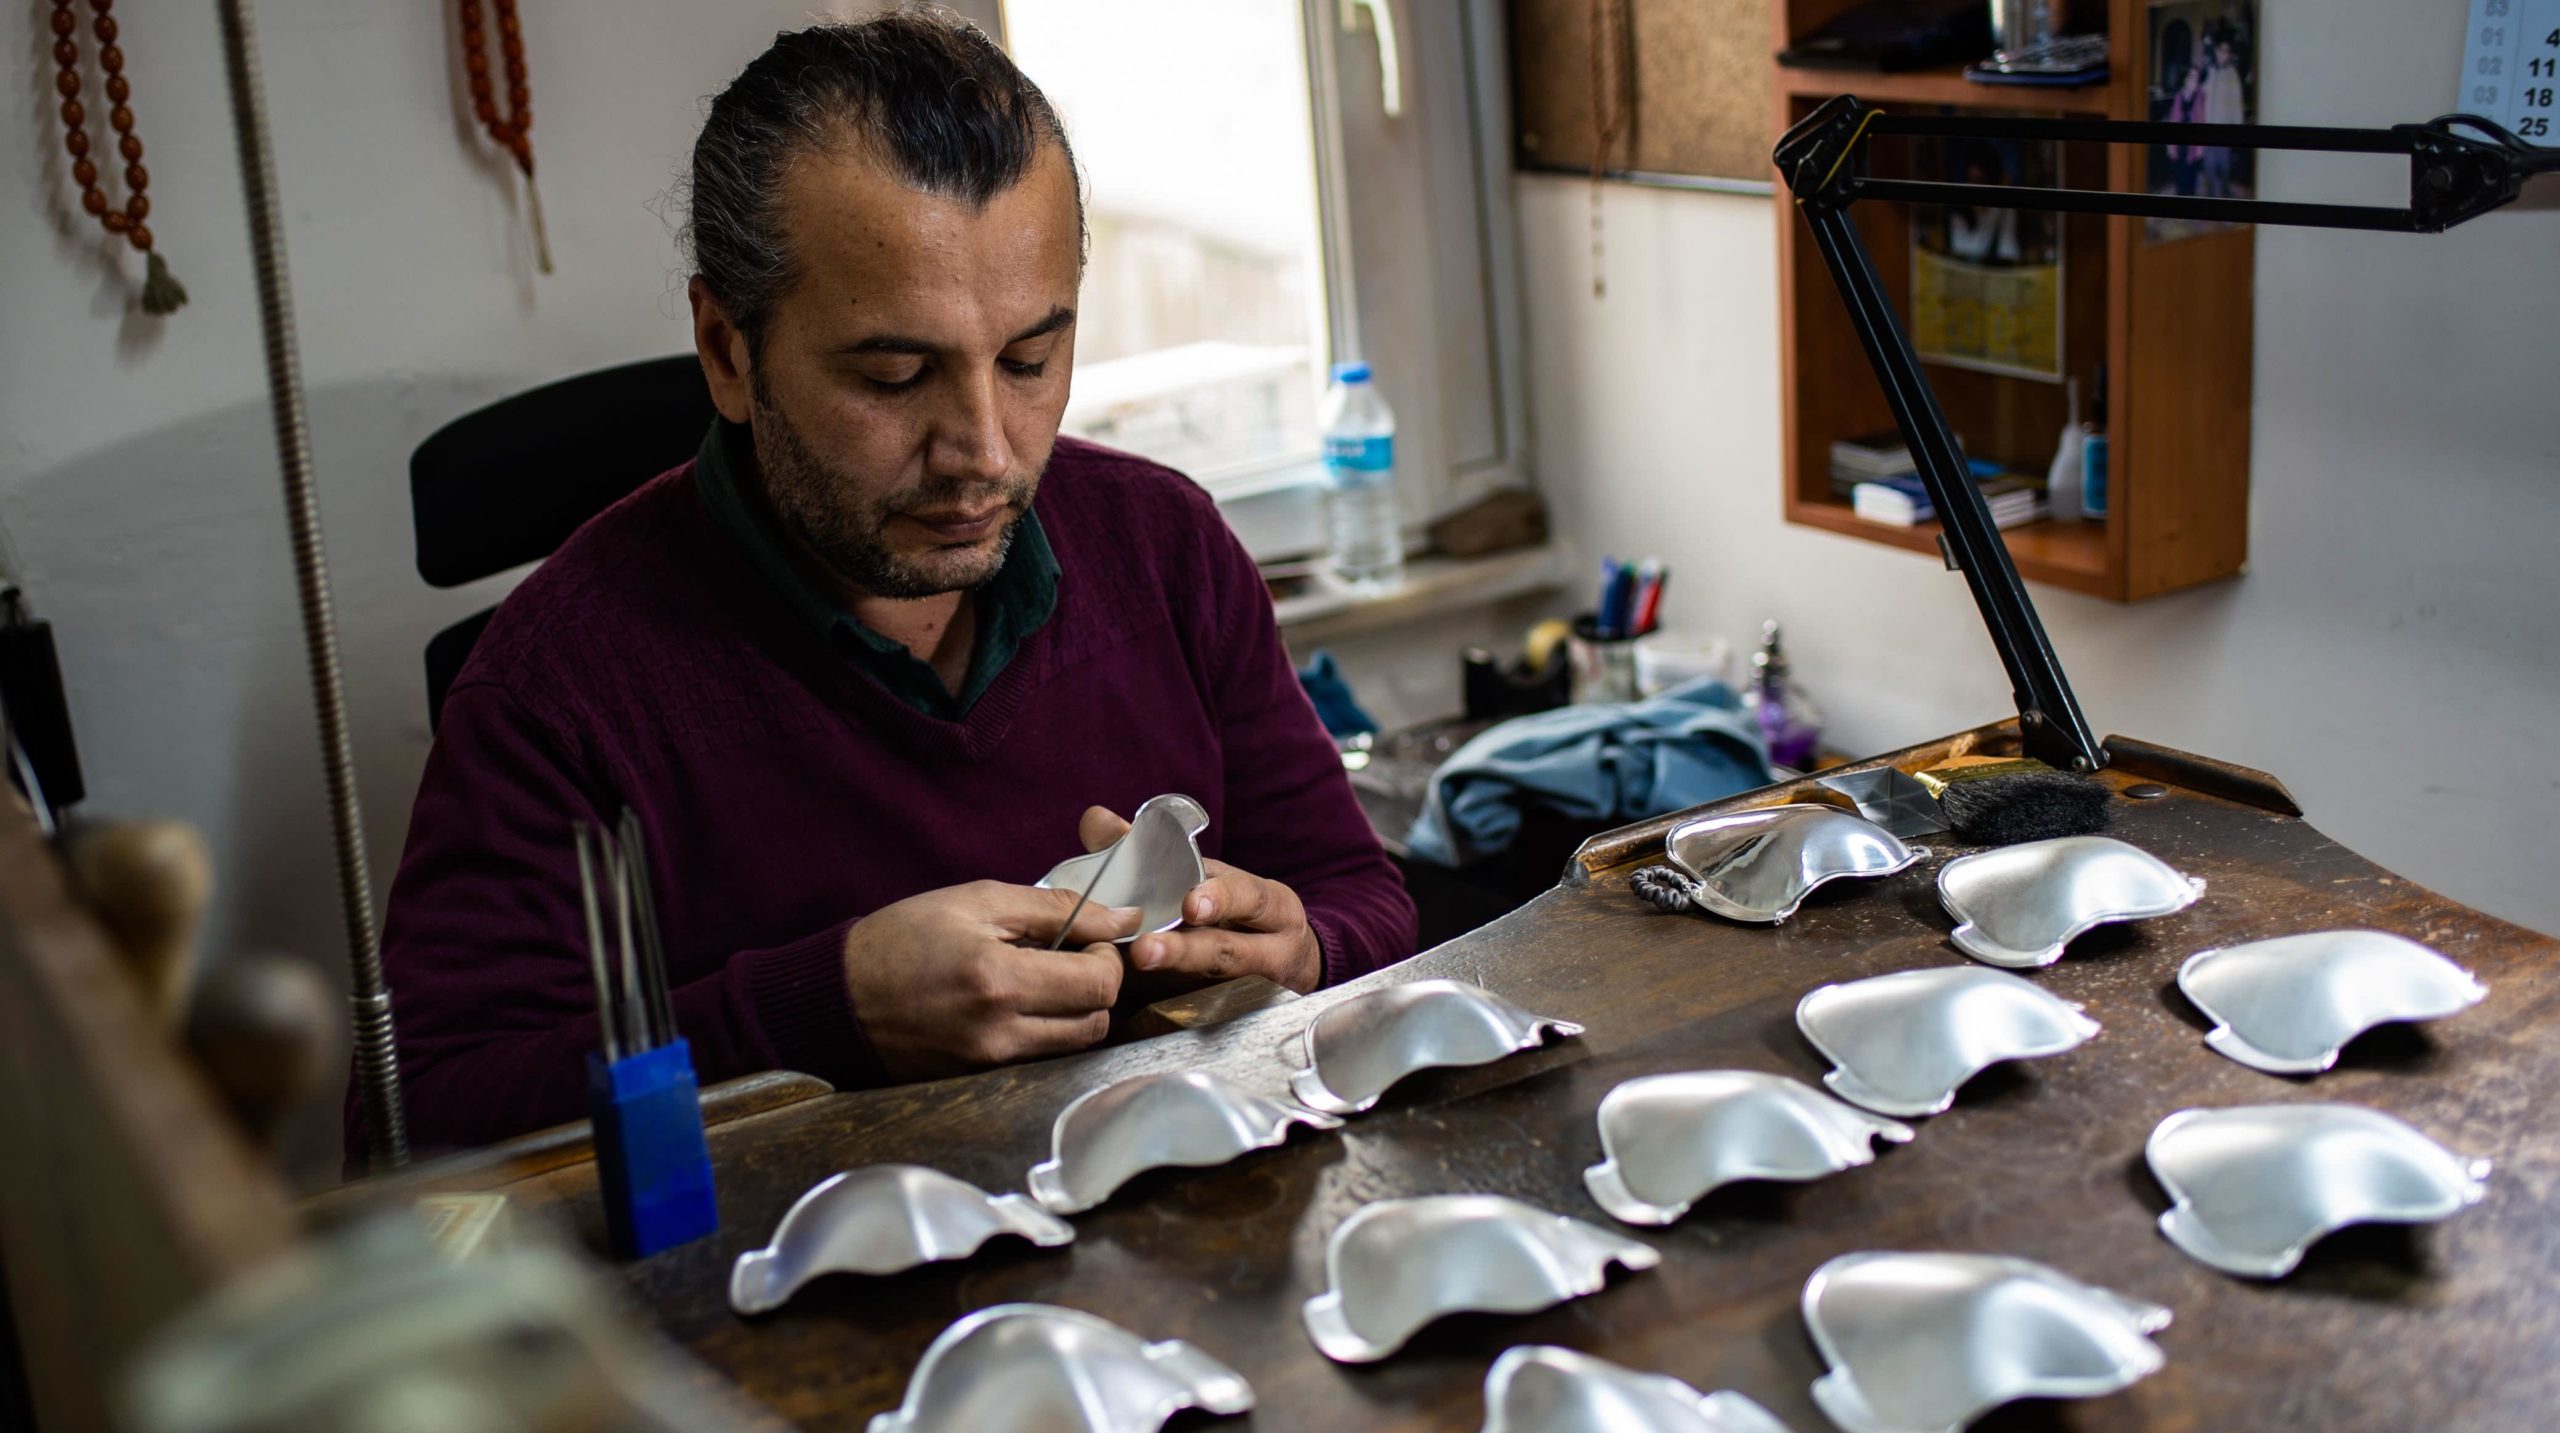 Turkish silver master Sabri Demirci works on his silver and golden protective face masks. (Photo: Yasin Akgul / AFP, Getty Images)